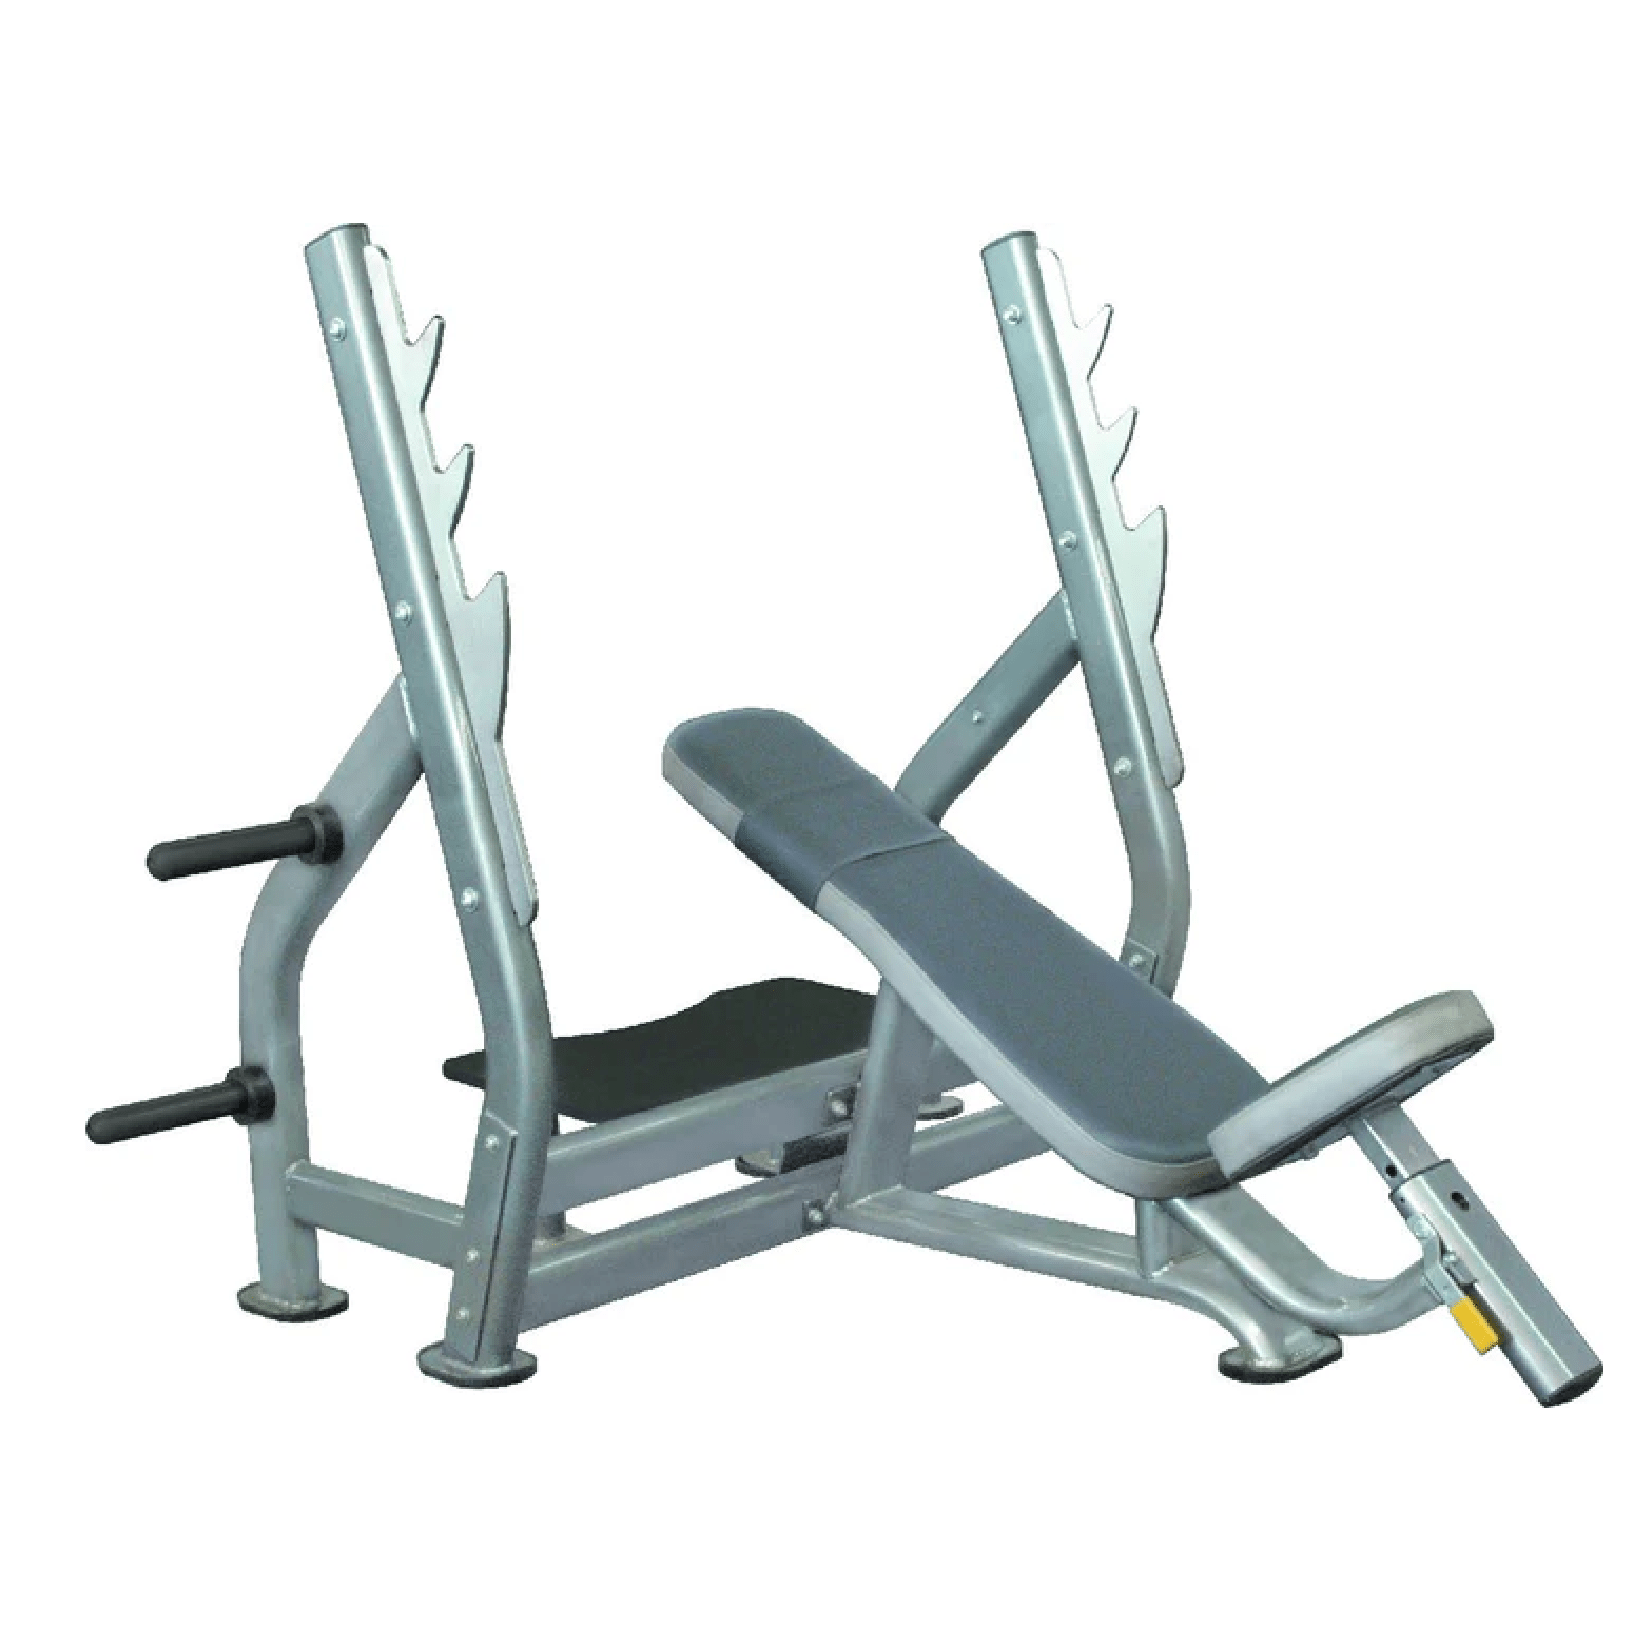 Progression 312 Olympic Incline Bench-Incline Bench-Progression Fitness-1